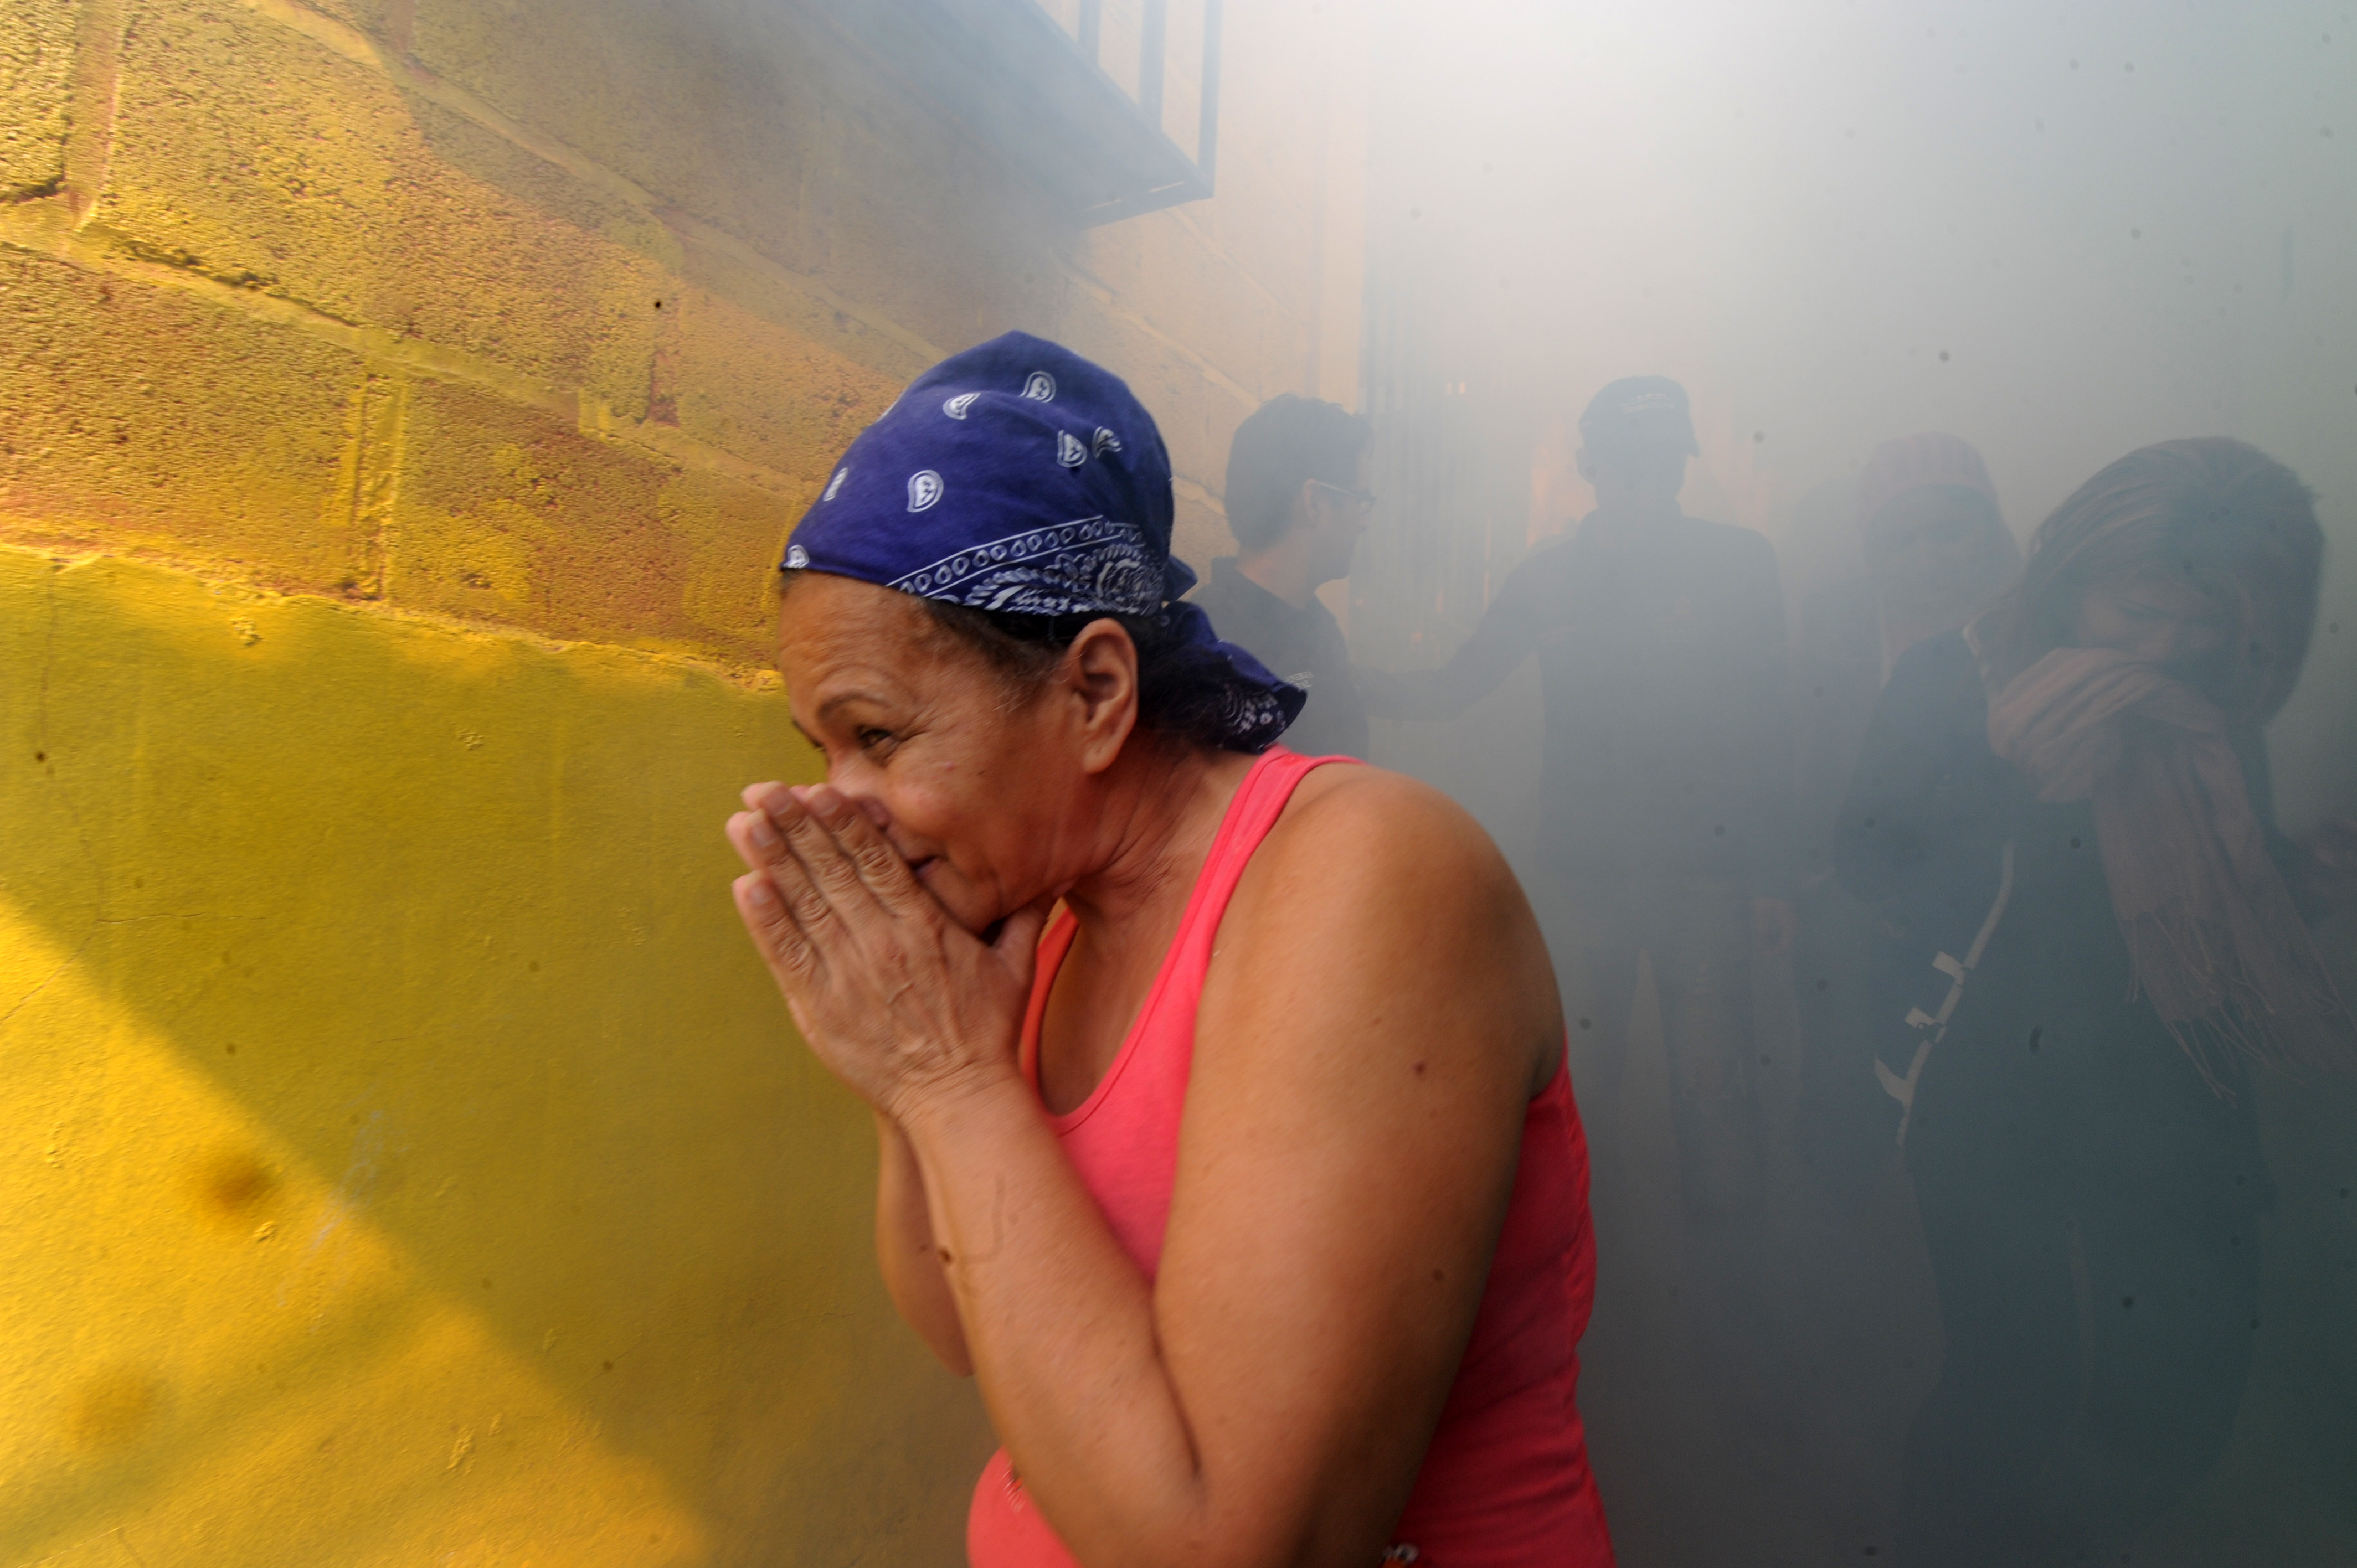 People help soldiers fumigate in the fight against Aedes Aegypti mosquito that transmits Zika virus, in Tegucigalpa on February 6, 2016. (Orlando Sierra—AFP/Getty Images)